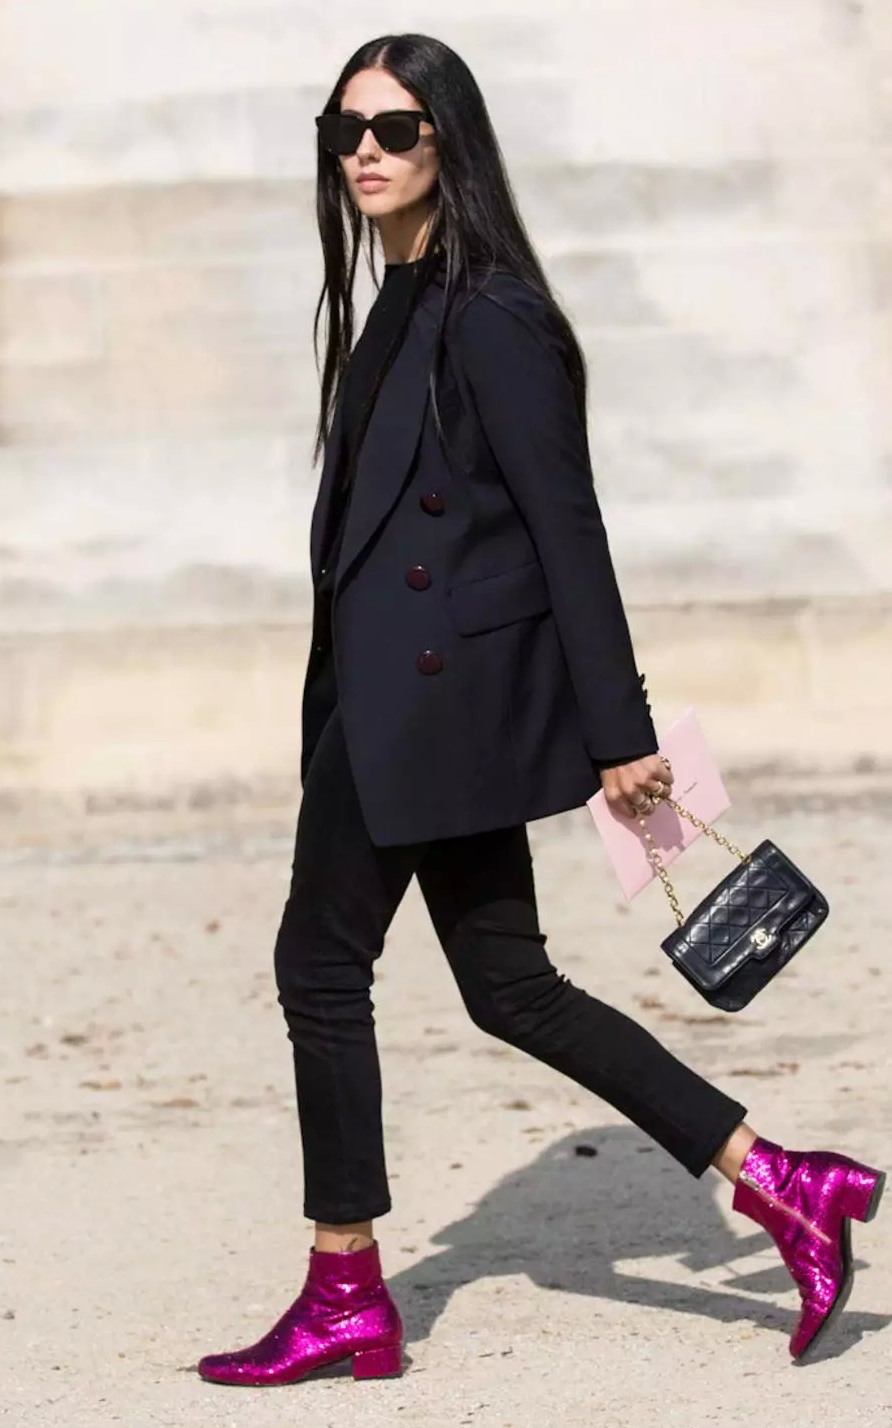 fashionable outfit / blazer + bag + pants + pink boots